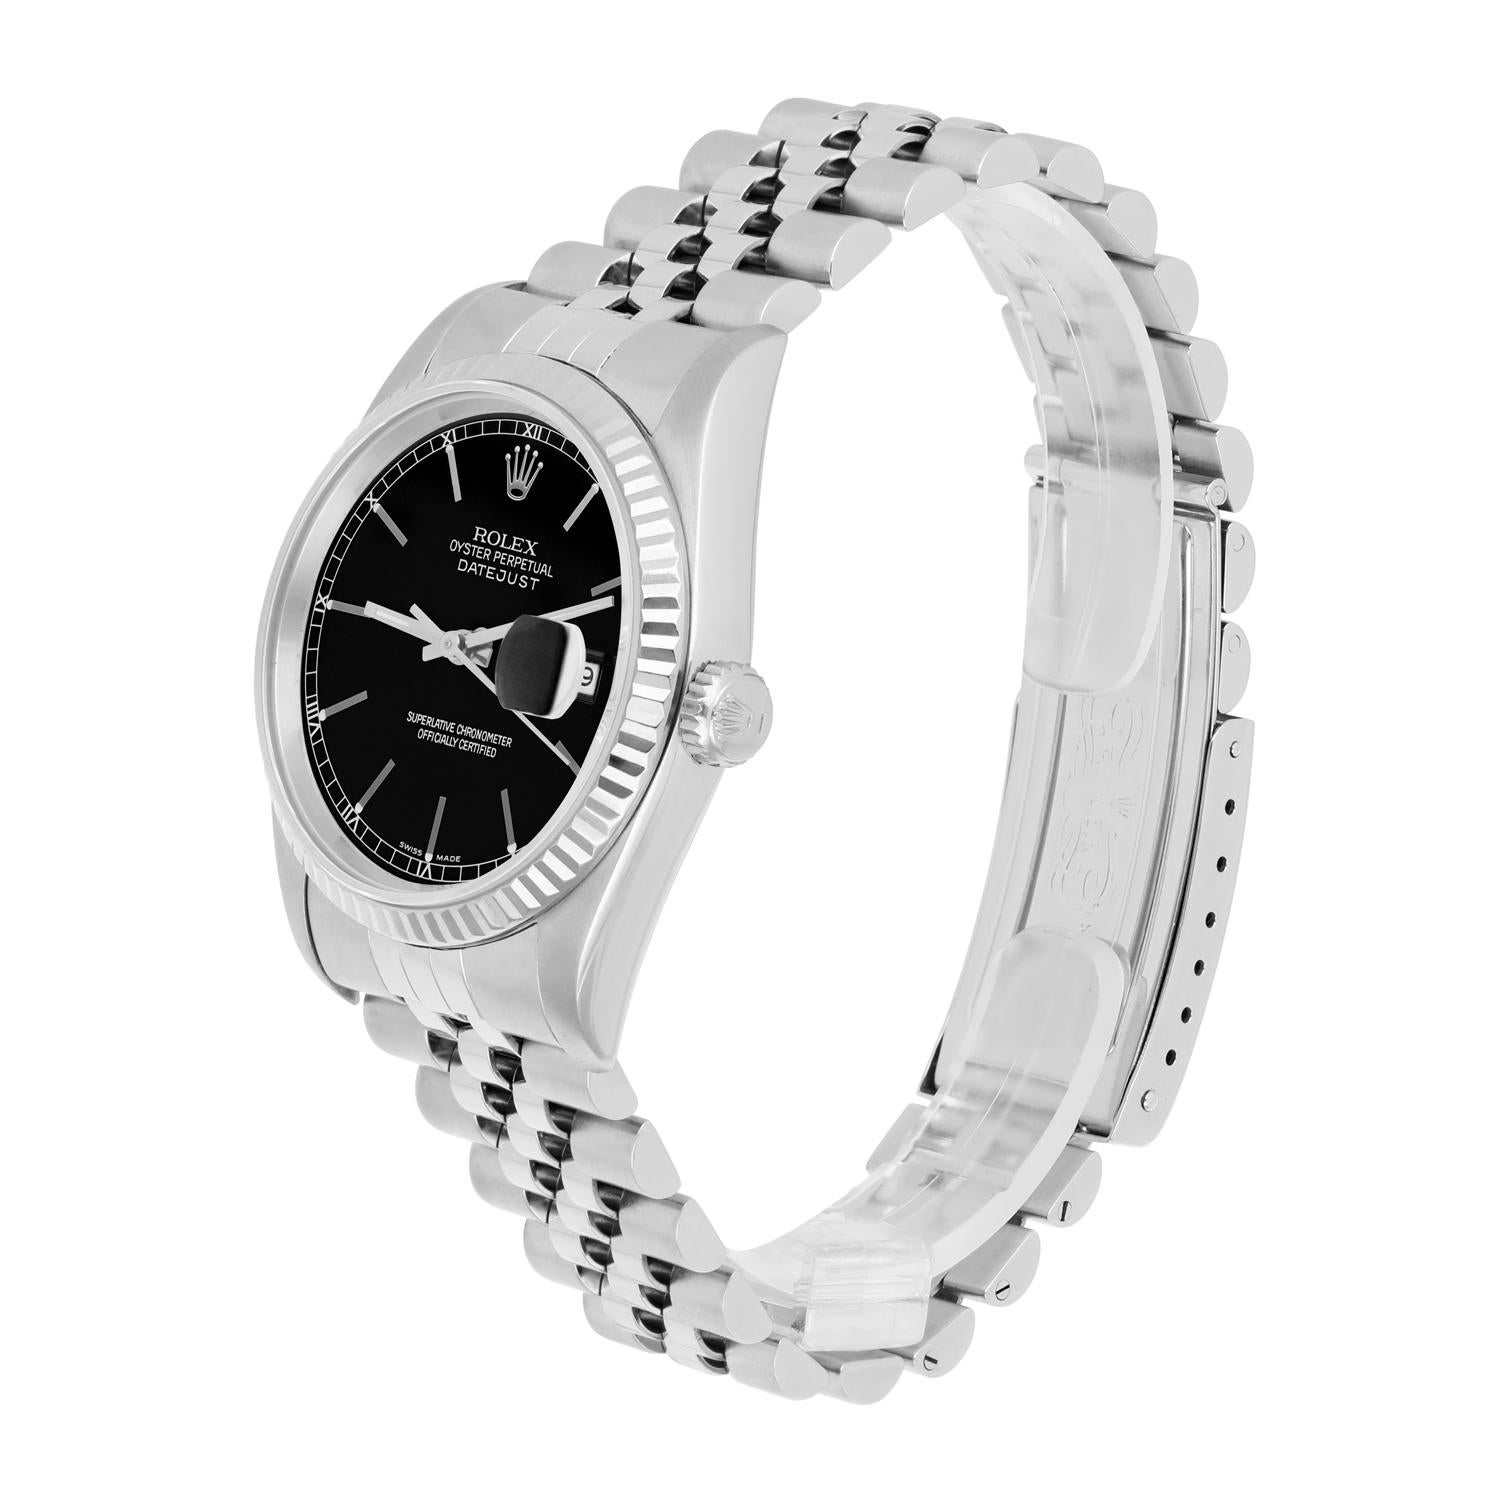 Women's or Men's Rolex Datejust 36mm Stainless Steel 16234 Black Index Dial, Jubilee Circa 2000